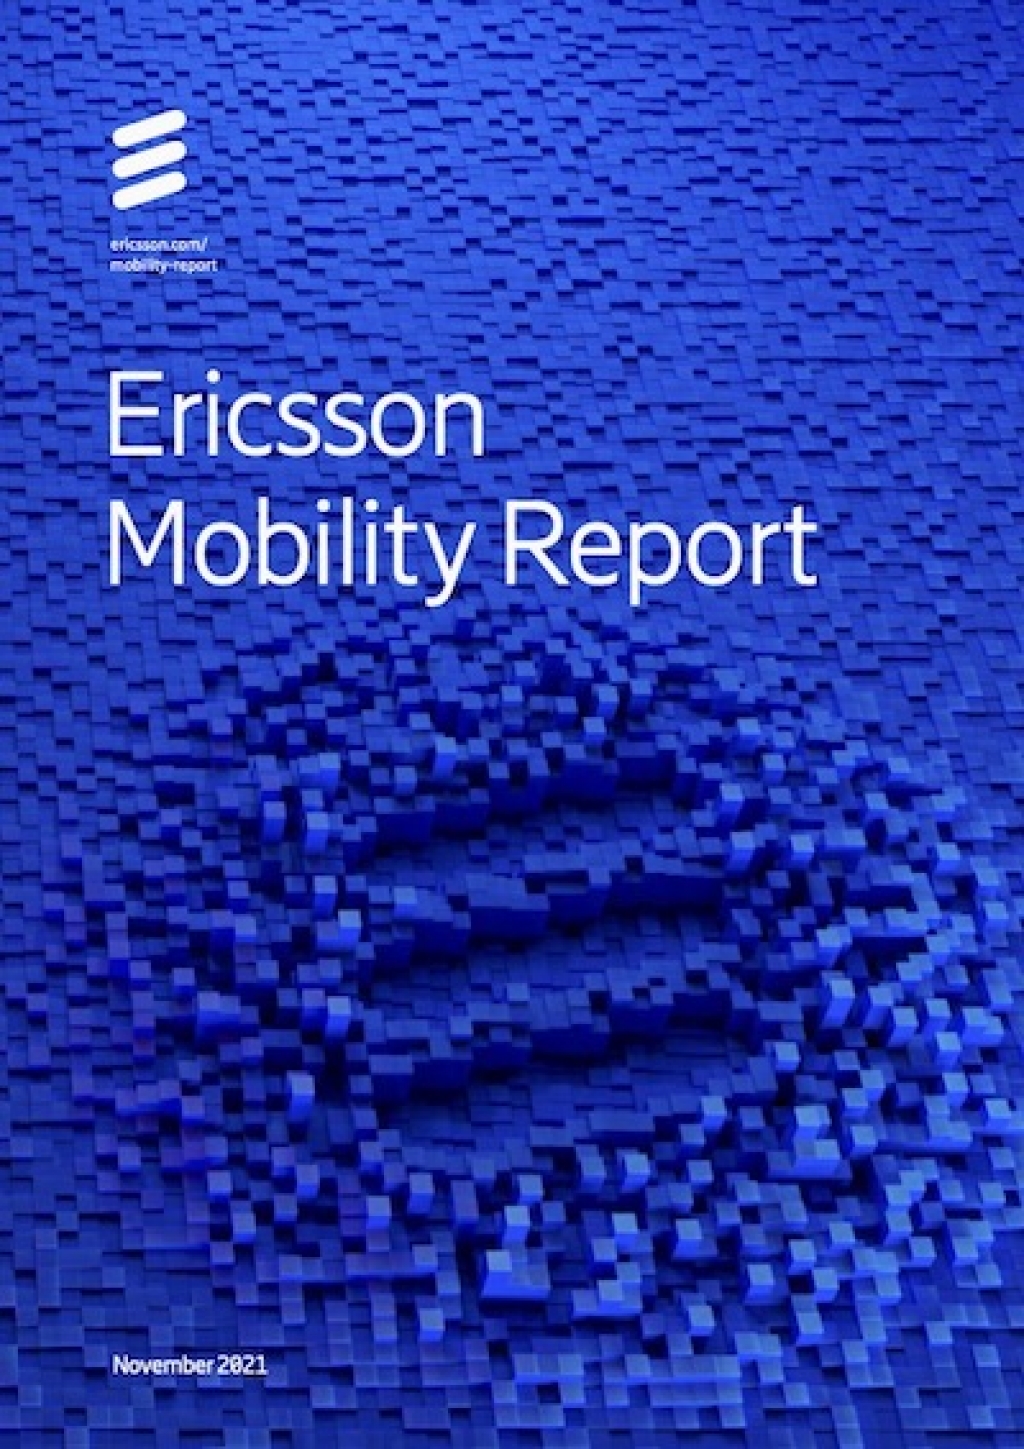 Mobile data traffic increased almost 300-fold over 10 years - Ericsson Mobility Report